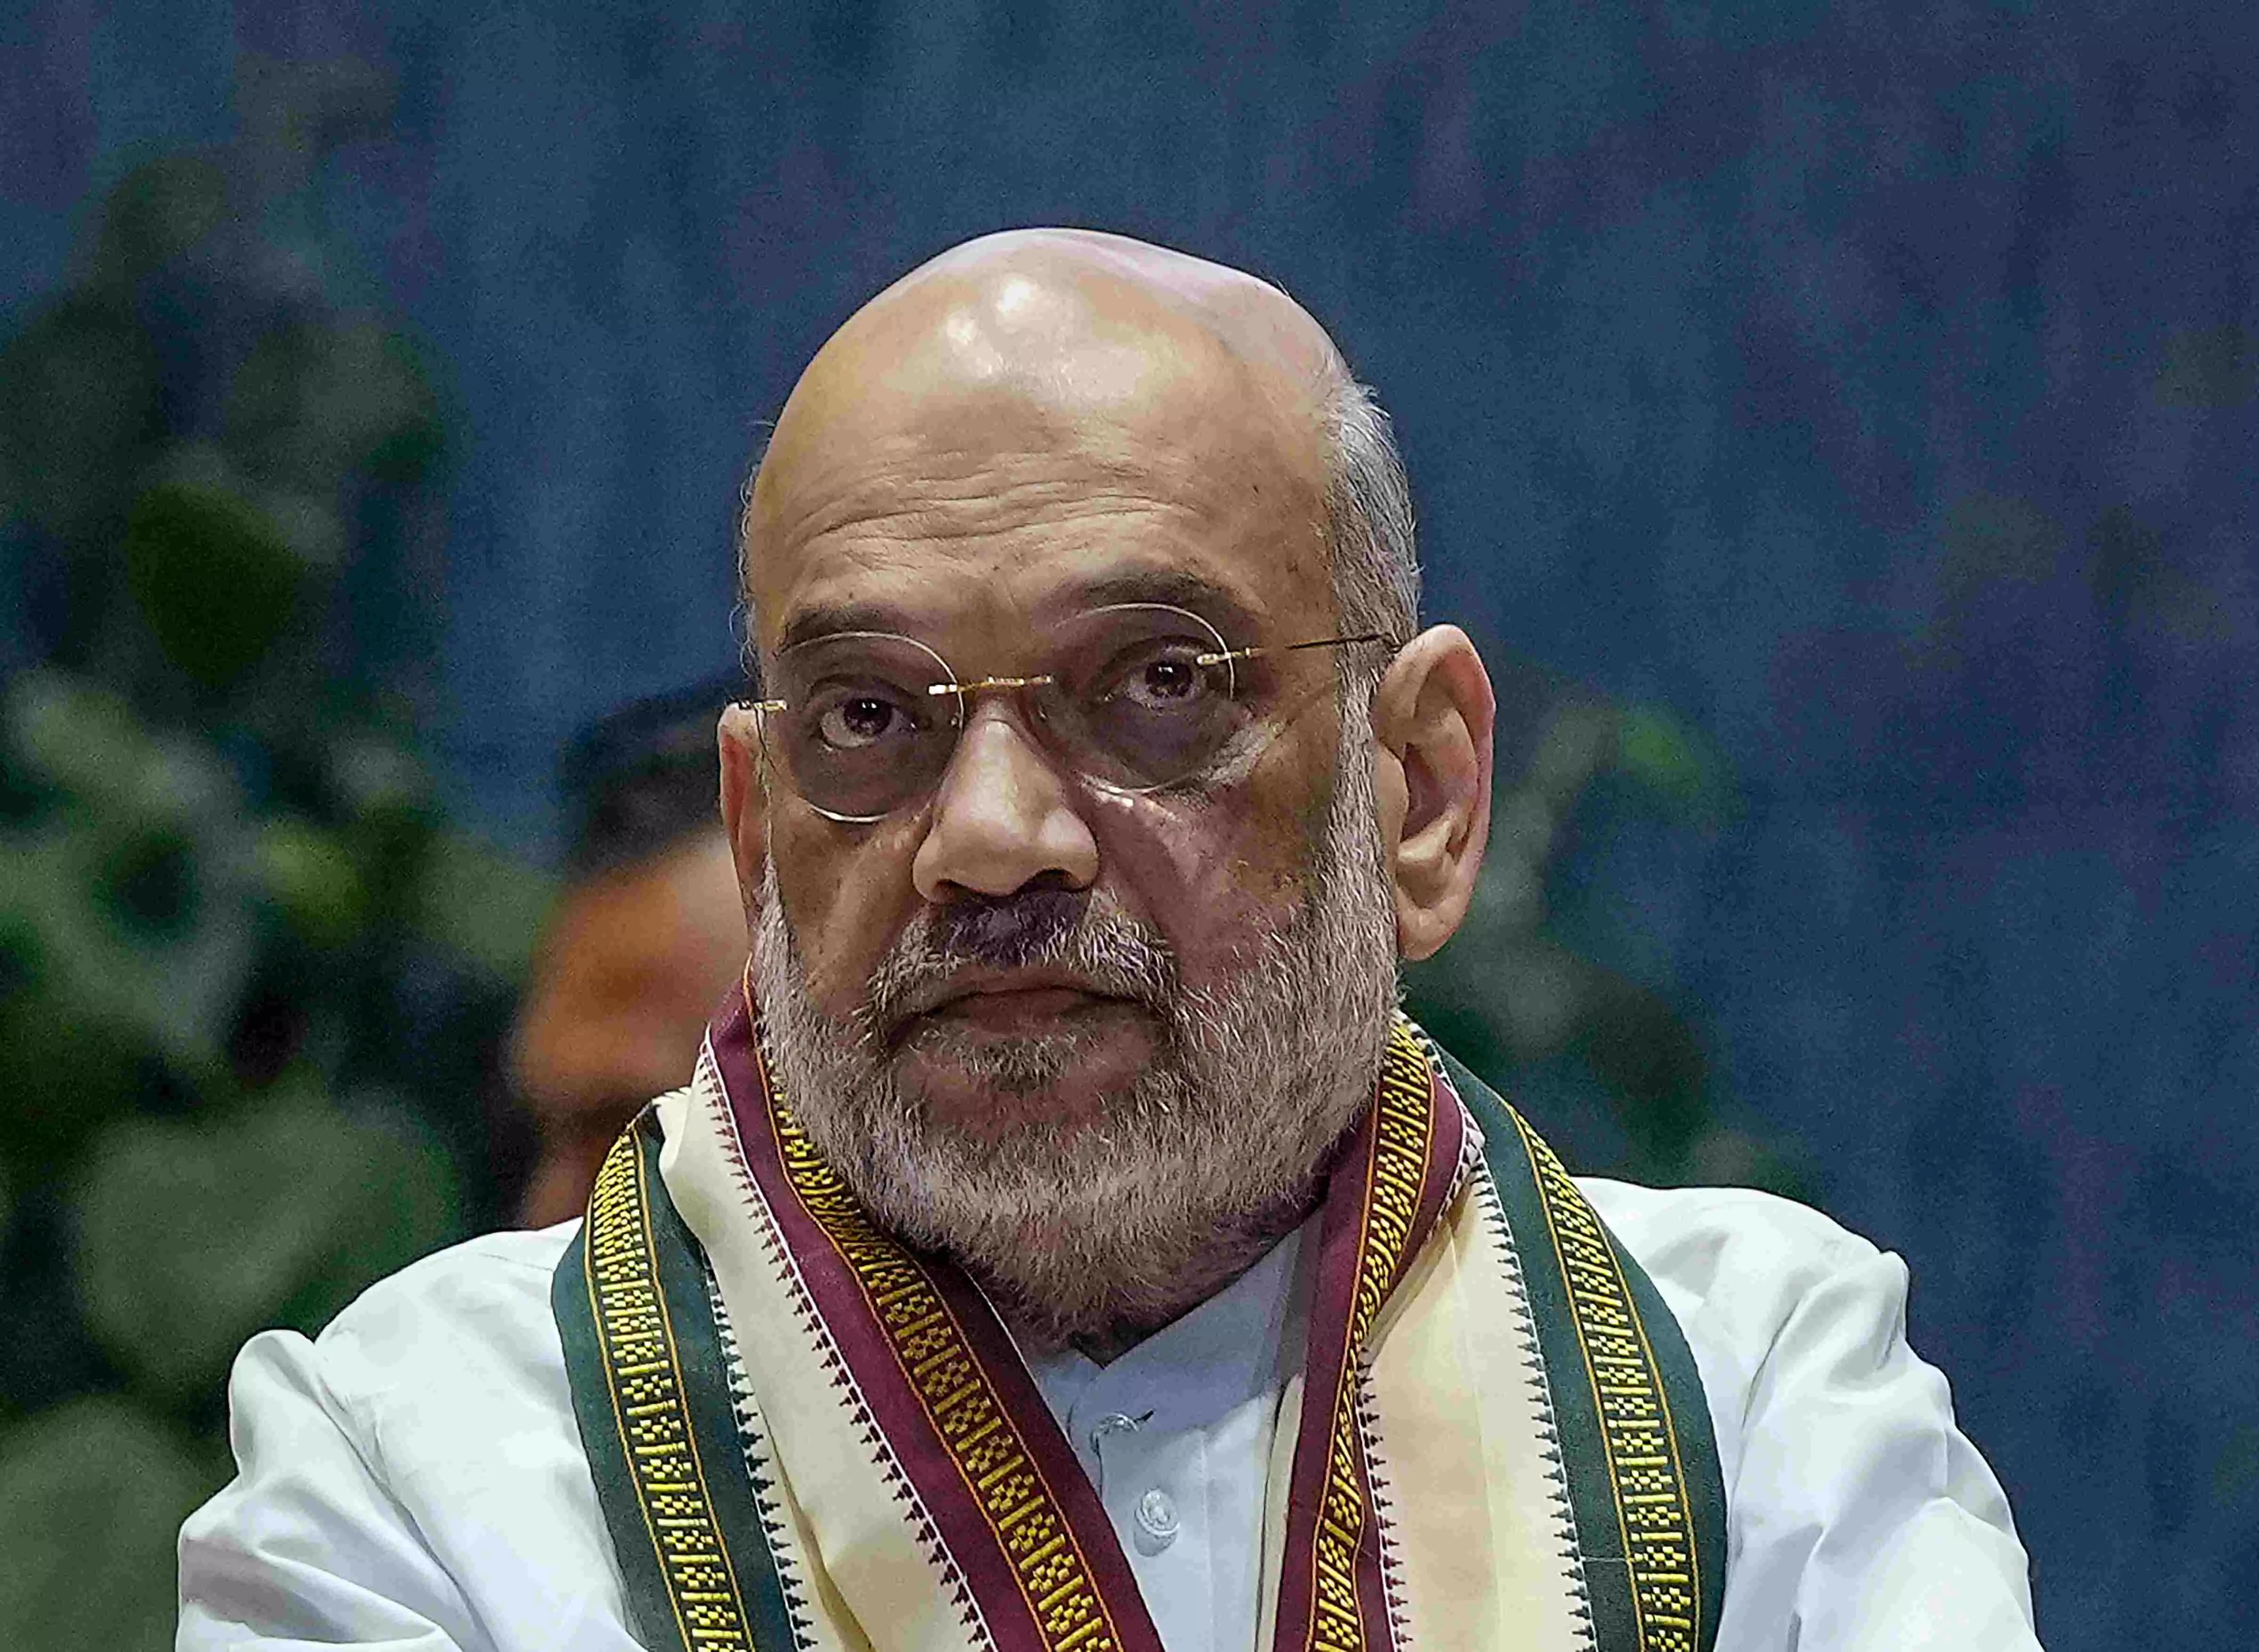 Leaders of INDIA bloc will scramble for PMs post if it comes to power: Shah